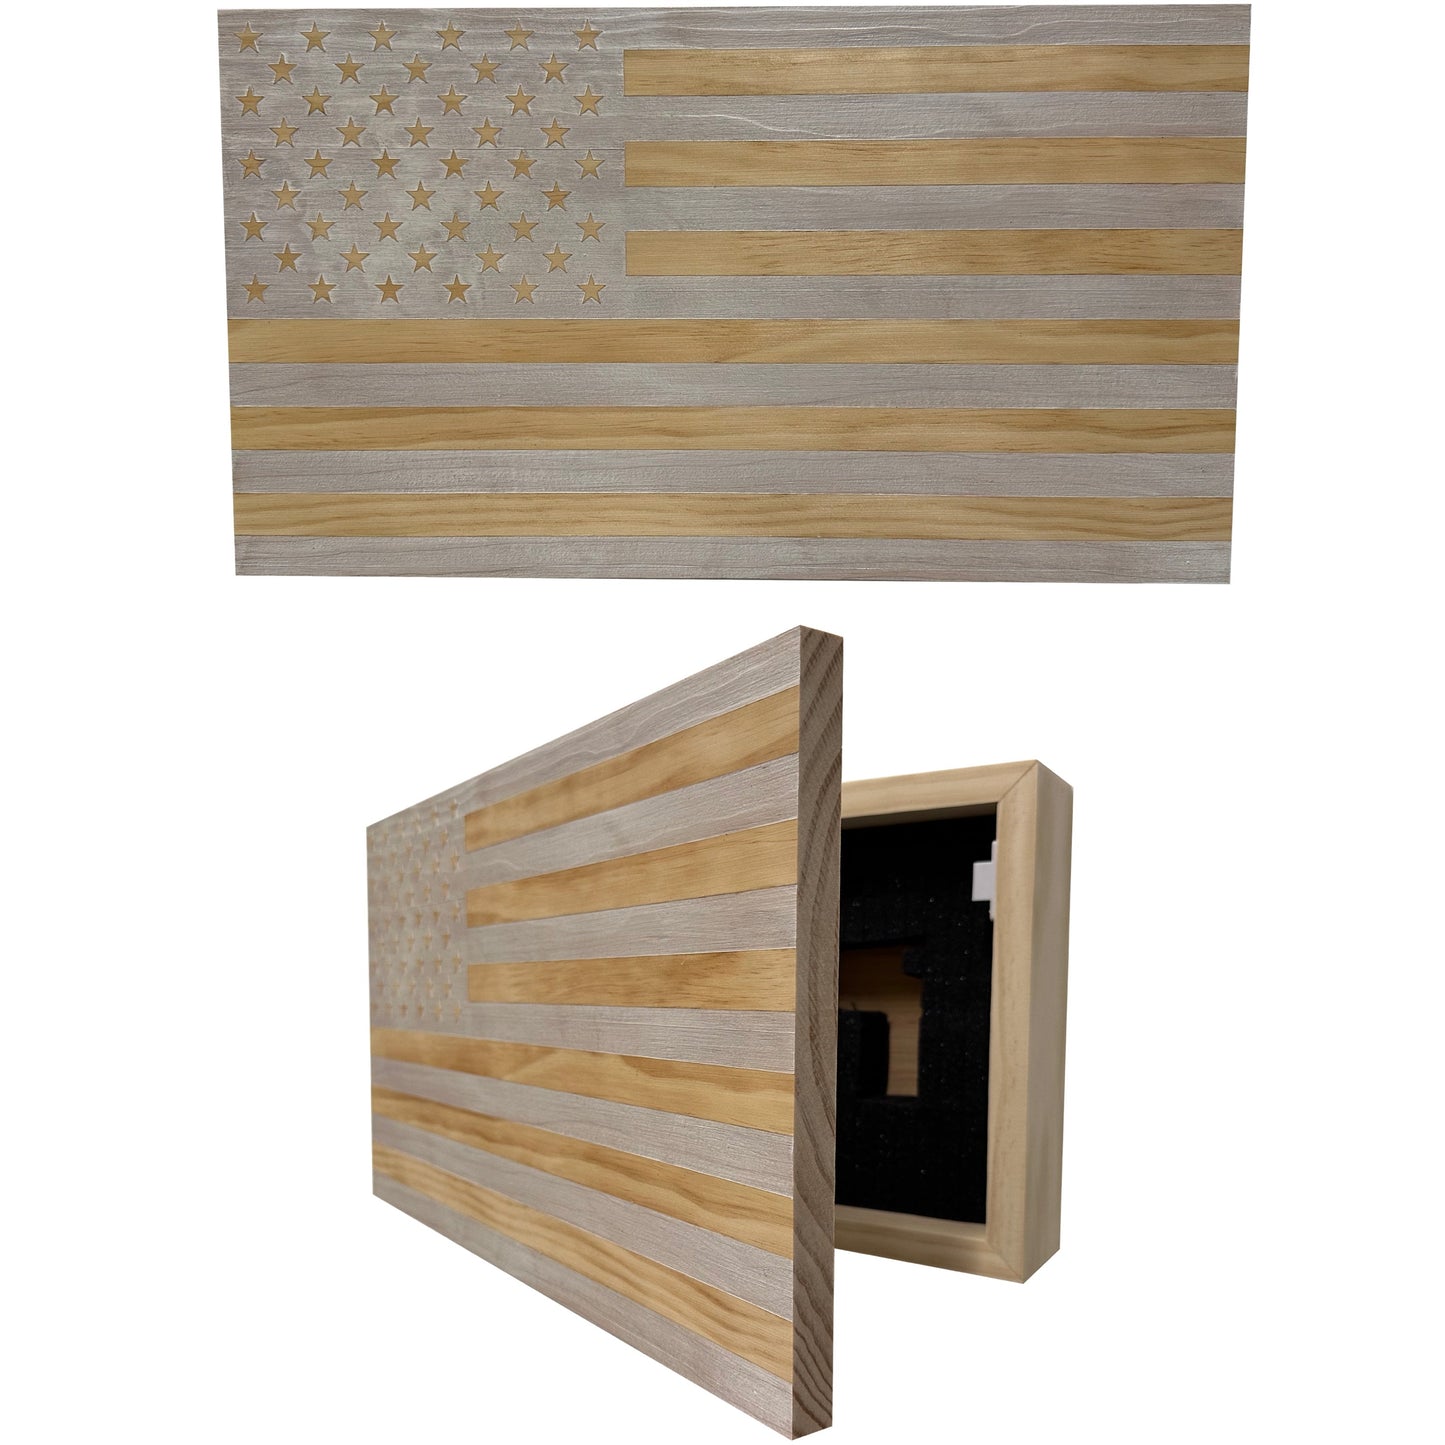 American Flag Decorative & Secure Wall-Mounted Gun Cabinet (Whitewashed)